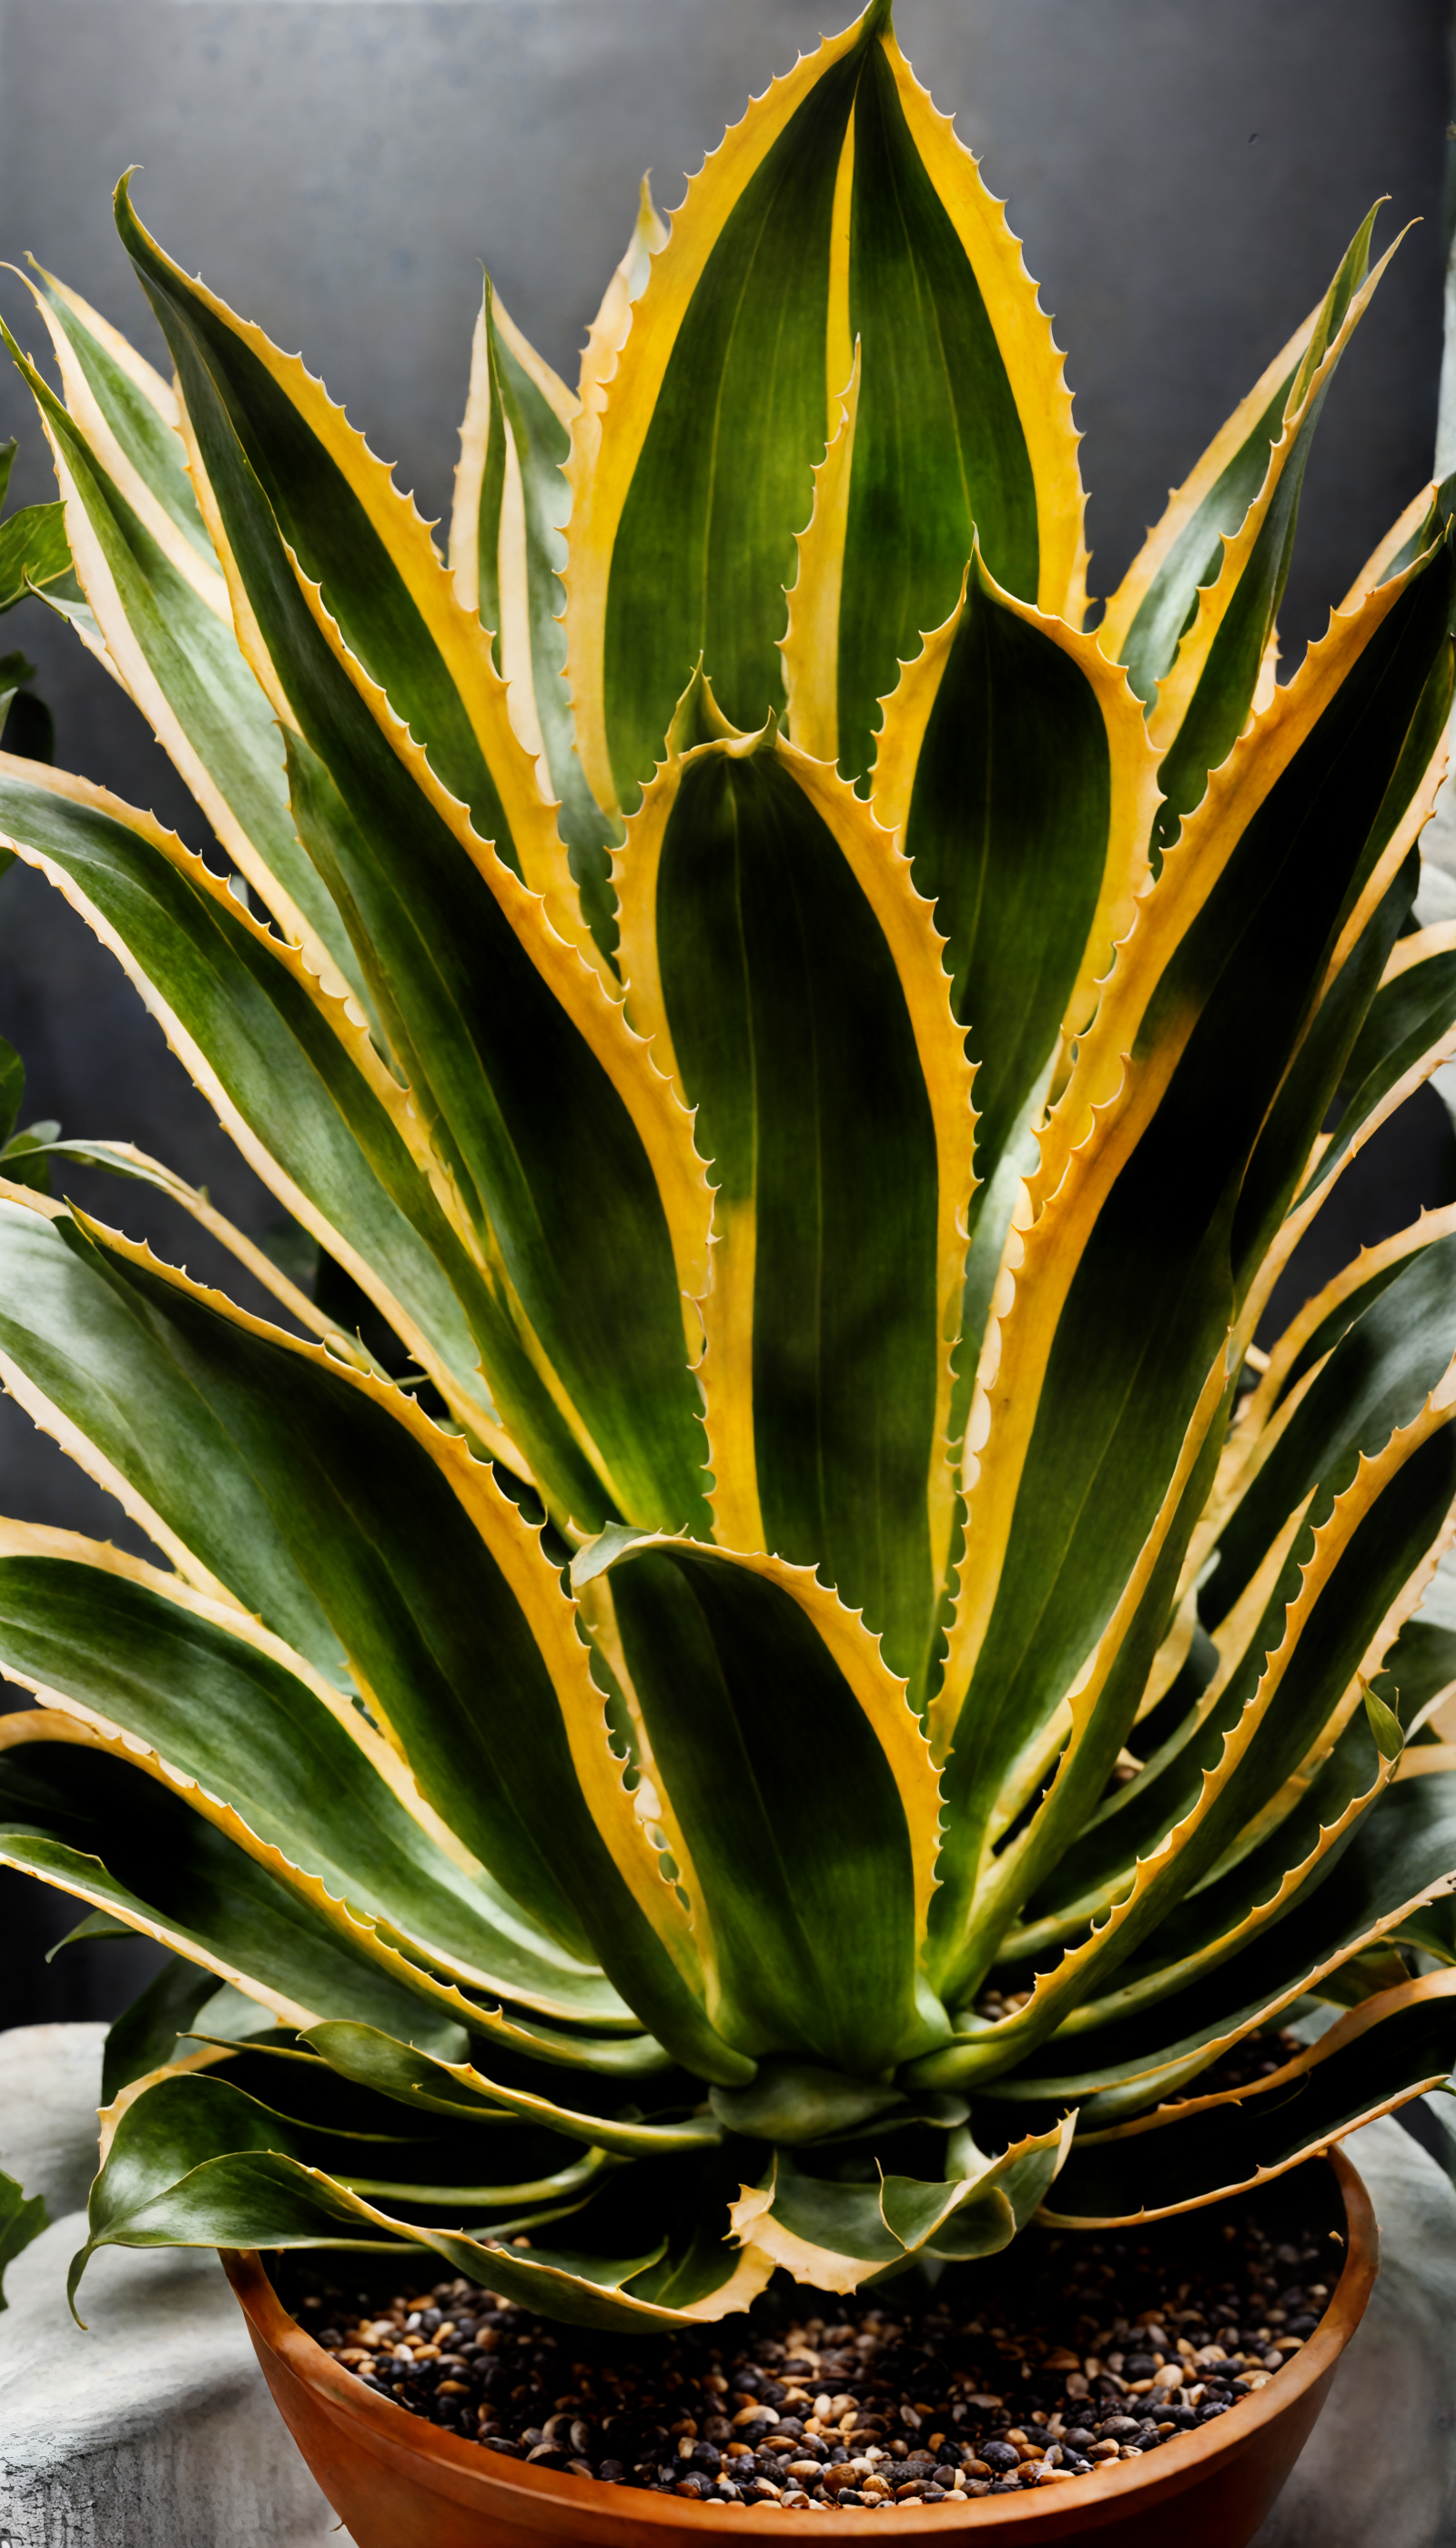 Agave americana in a planter, with a dark background and clear lighting, part of indoor décor.